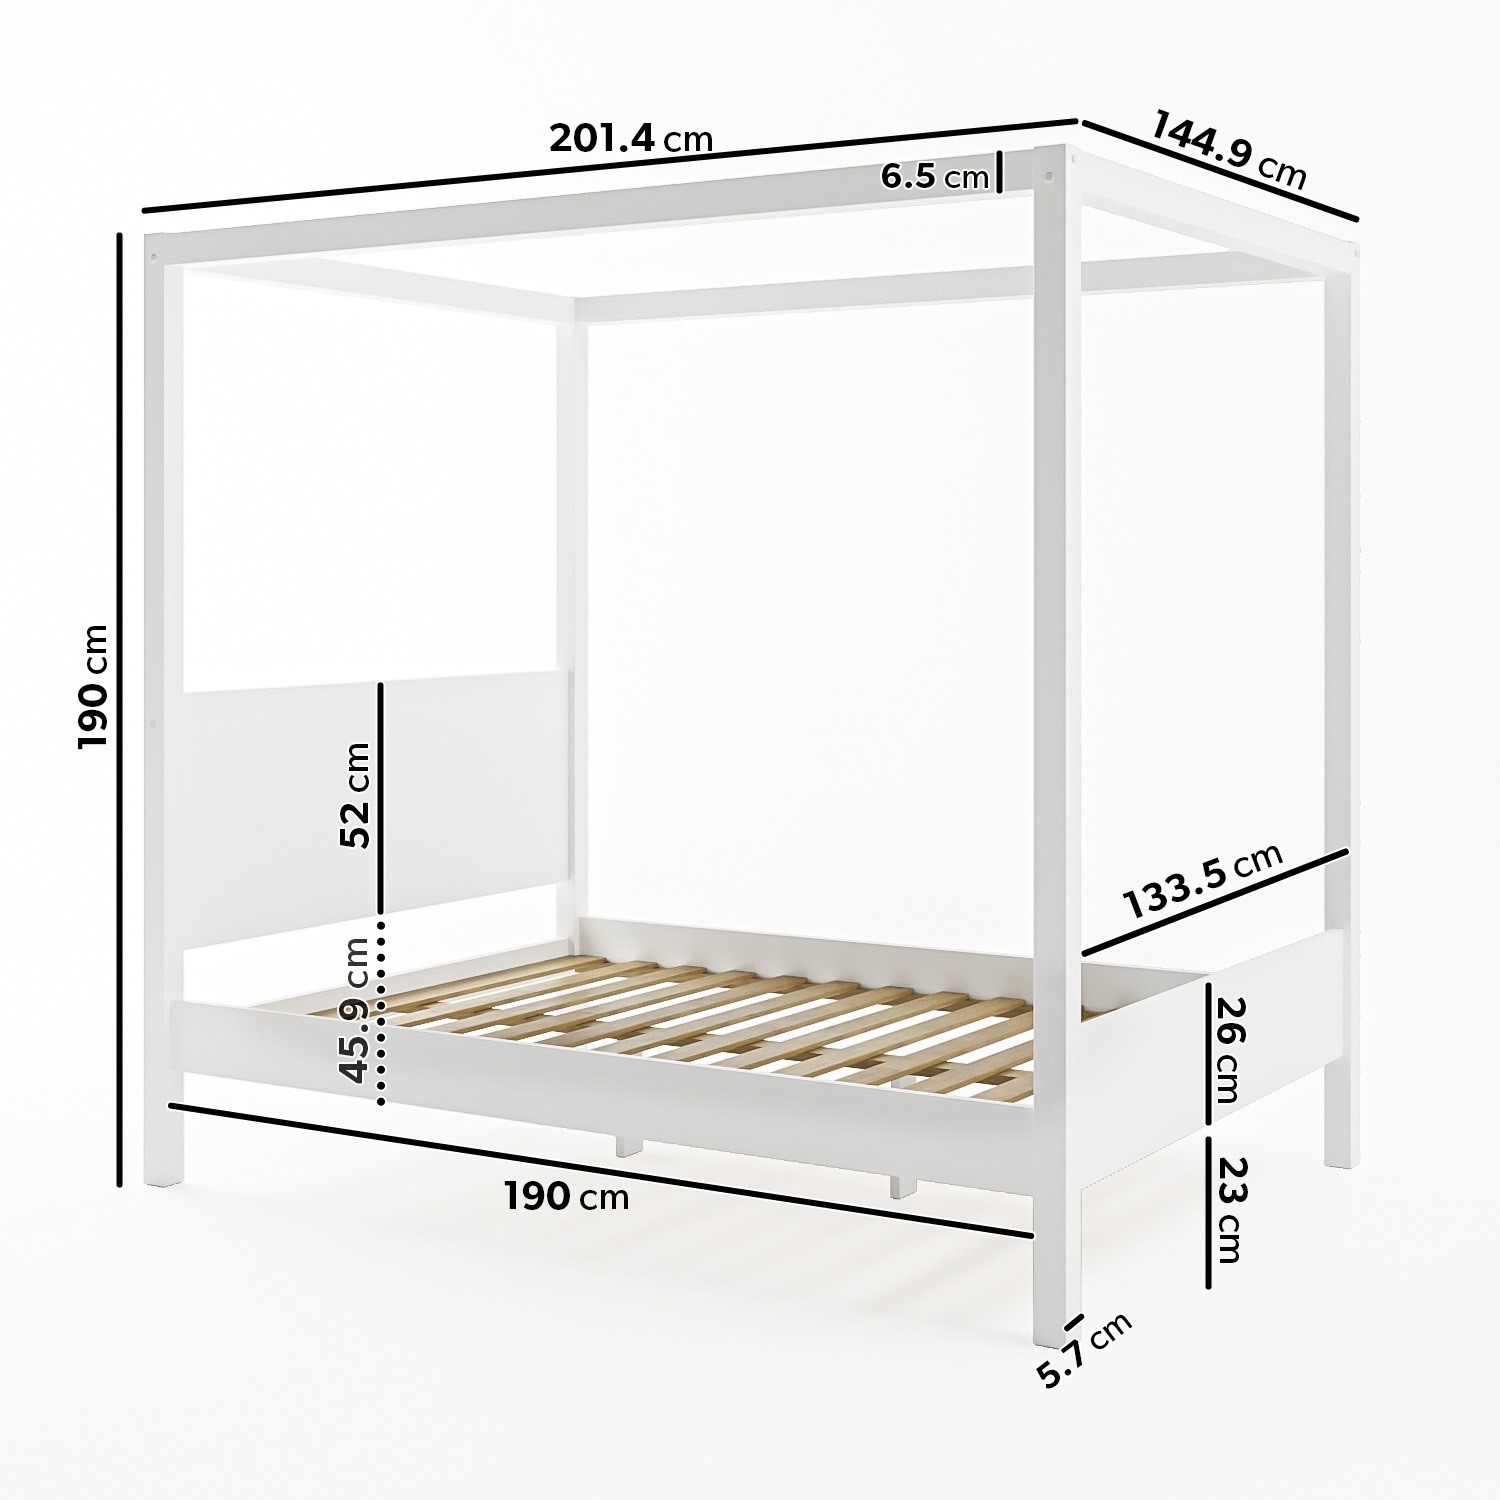 Read more about Double four poster bed frame in white victoria